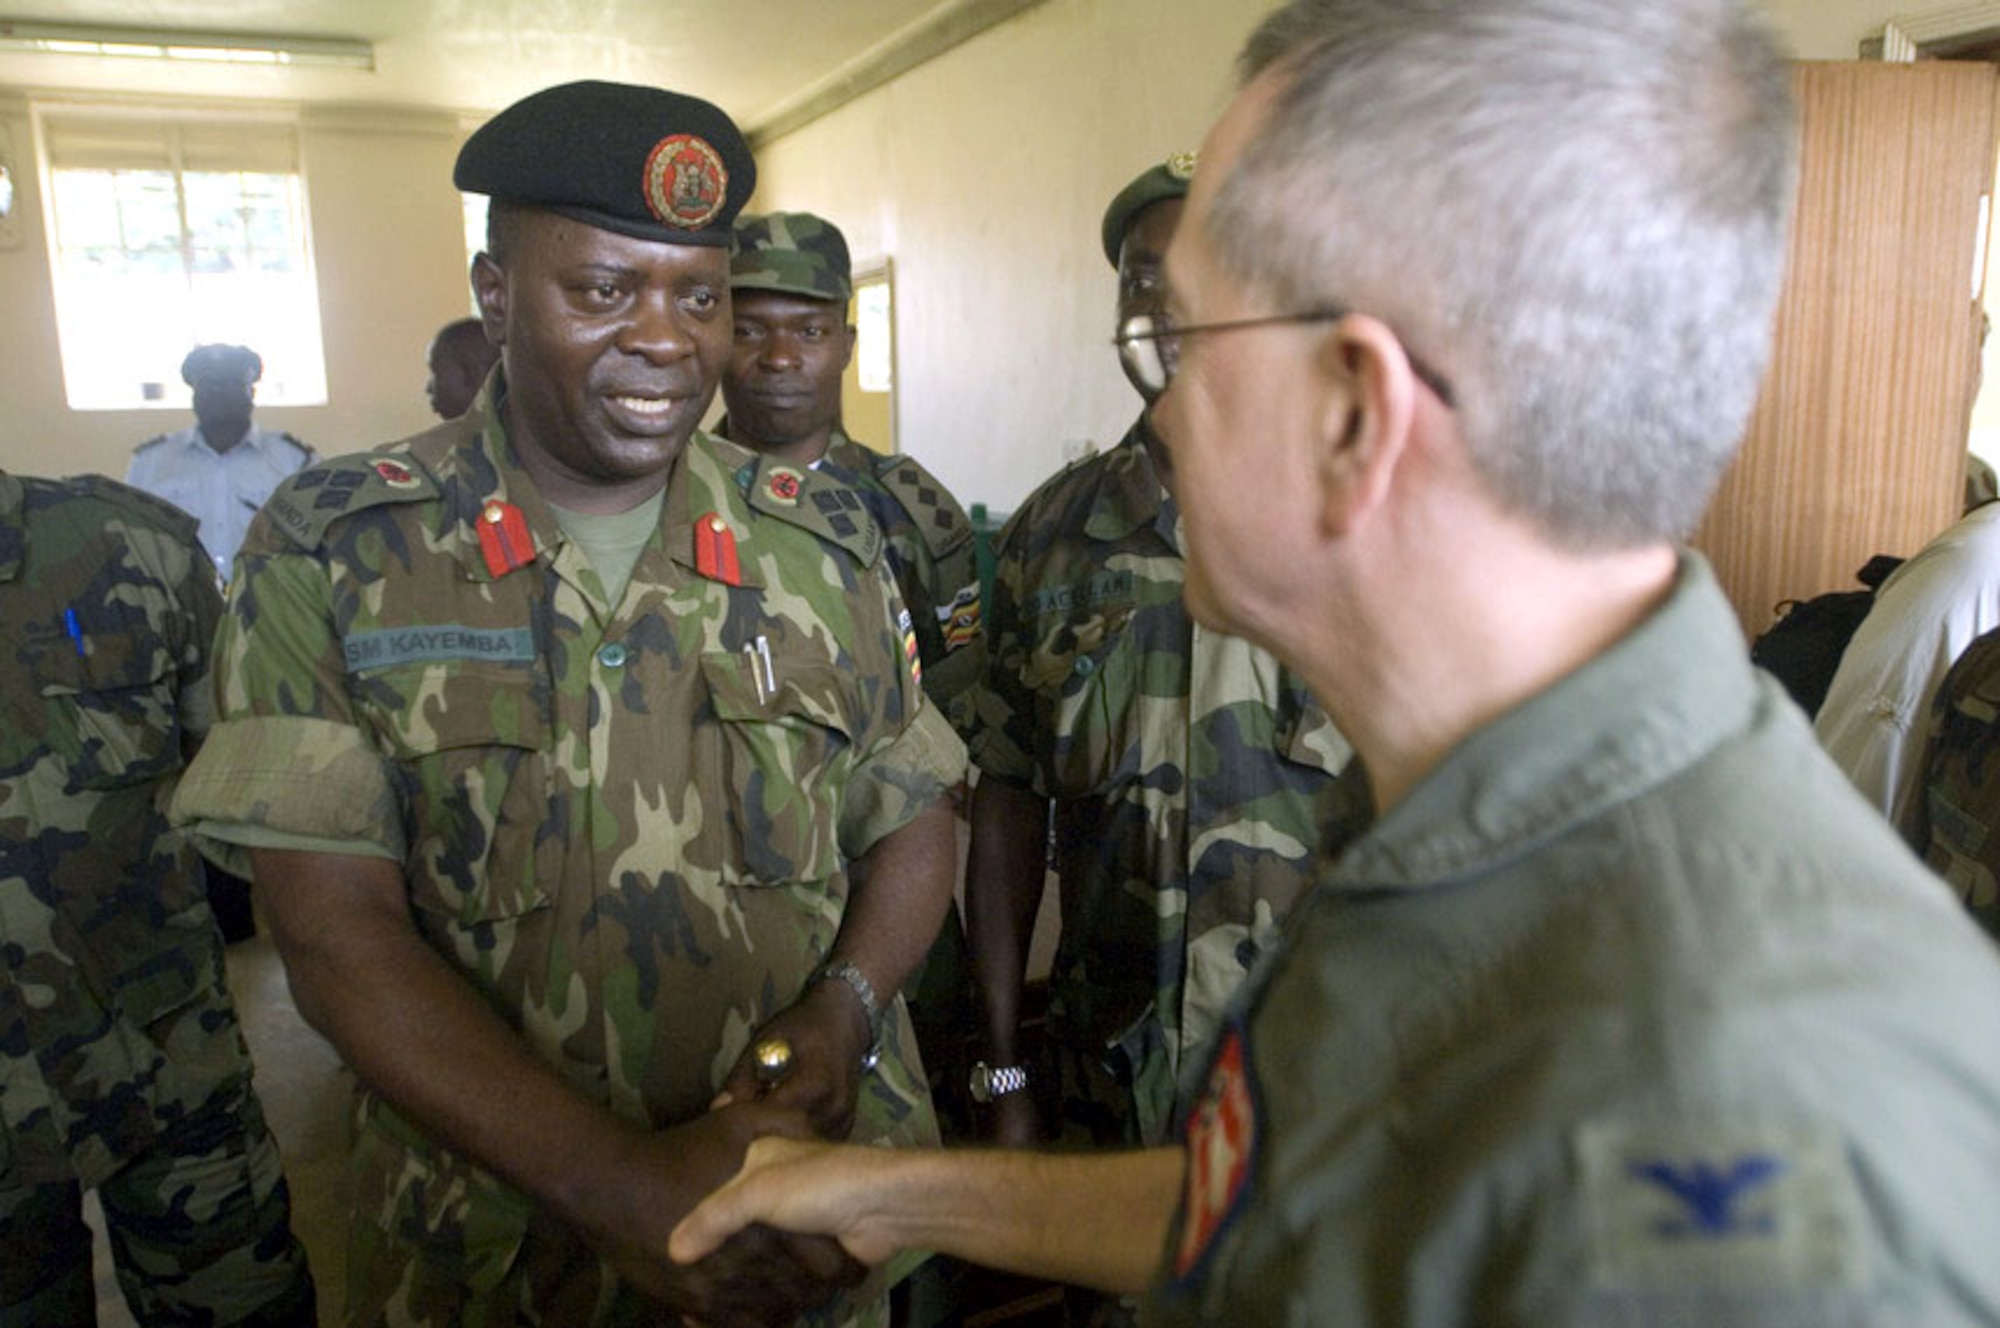 Ugandan Brig. Gen. Silver Kayemba welcomes Col. (Dr.) William Walters to Soroti, Uganda, for the training exercise Natural Fire 2006 on Aug. 9. General Kayemba is chief of operations and training for the Ugandan police and defense force. Colonel Walters is with the Tennessee Air National Guard. (U.S. Air Force photo/Master Sgt. John E. Lasky)